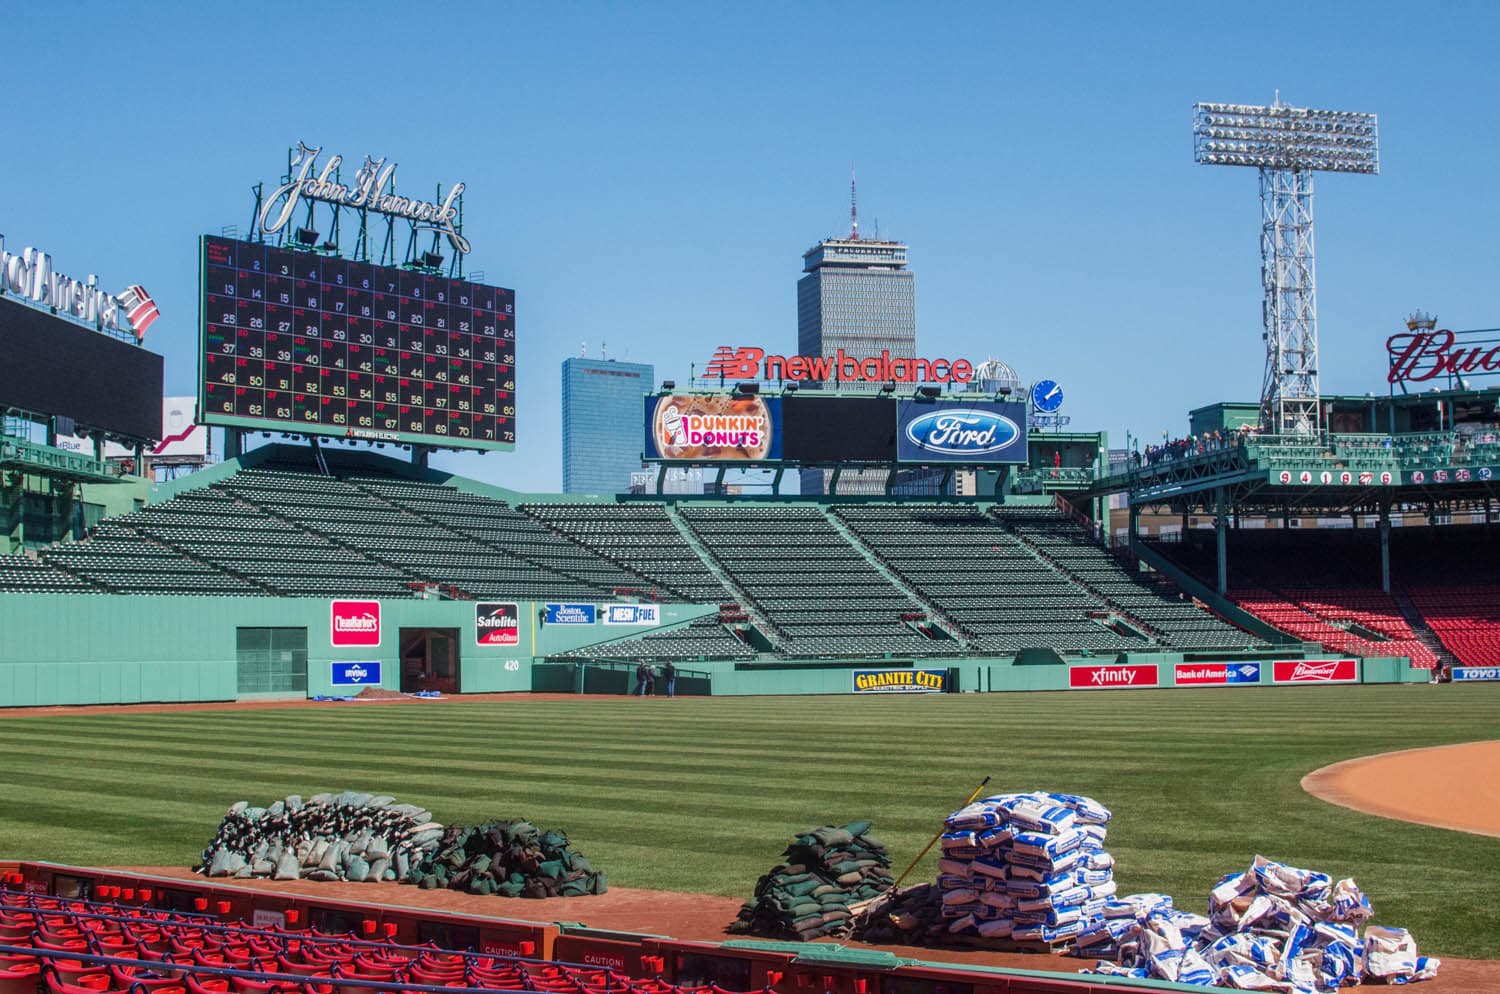 Preparations were underway last week at Fenway Park for Monday's season opener, when the Red Sox host the Pittsburgh Pirates. (Sharon Brody/WBUR)